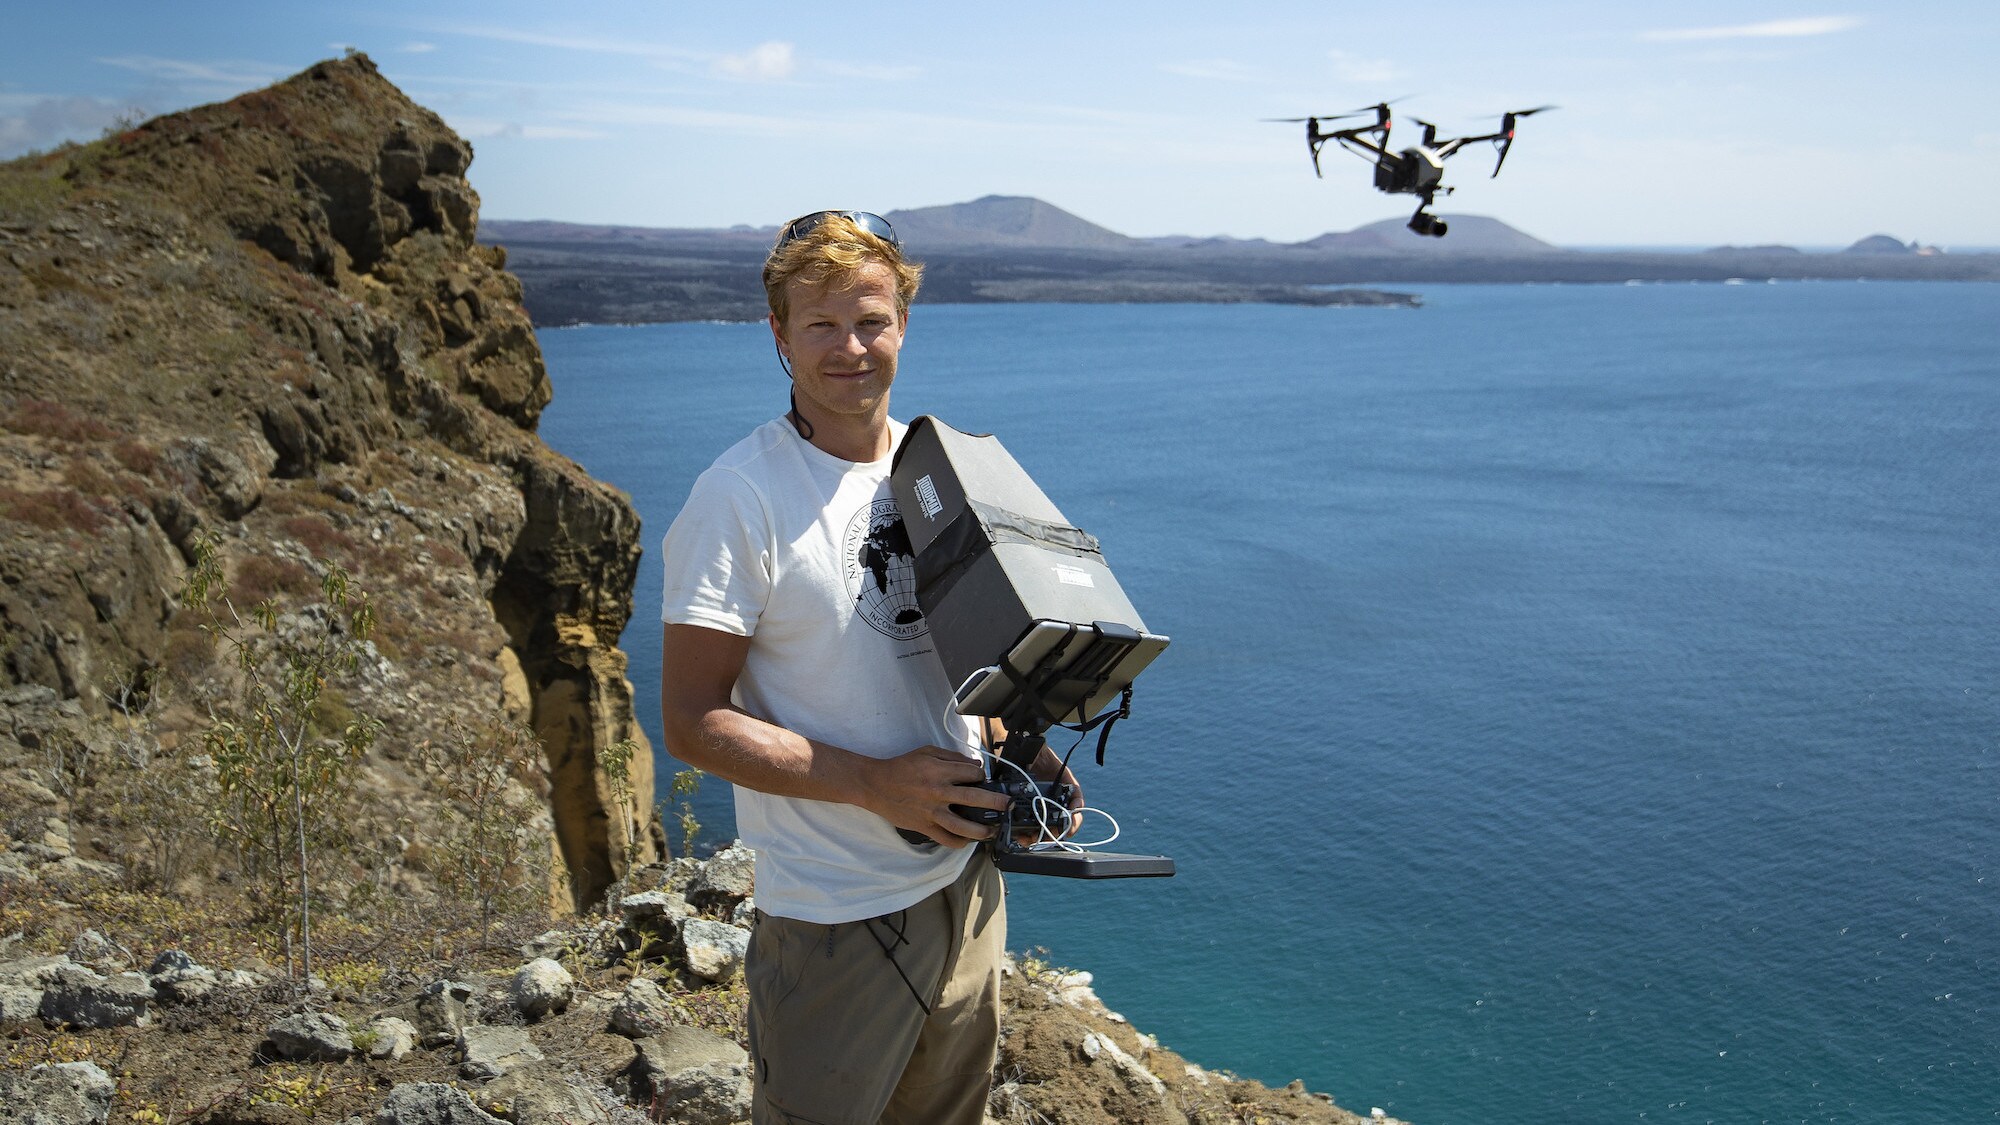 Bertie Gregory, holds the drone controls and monitor with the drone in the air to the side of him. (National Geographic for Disney+/Rakel Hansen)